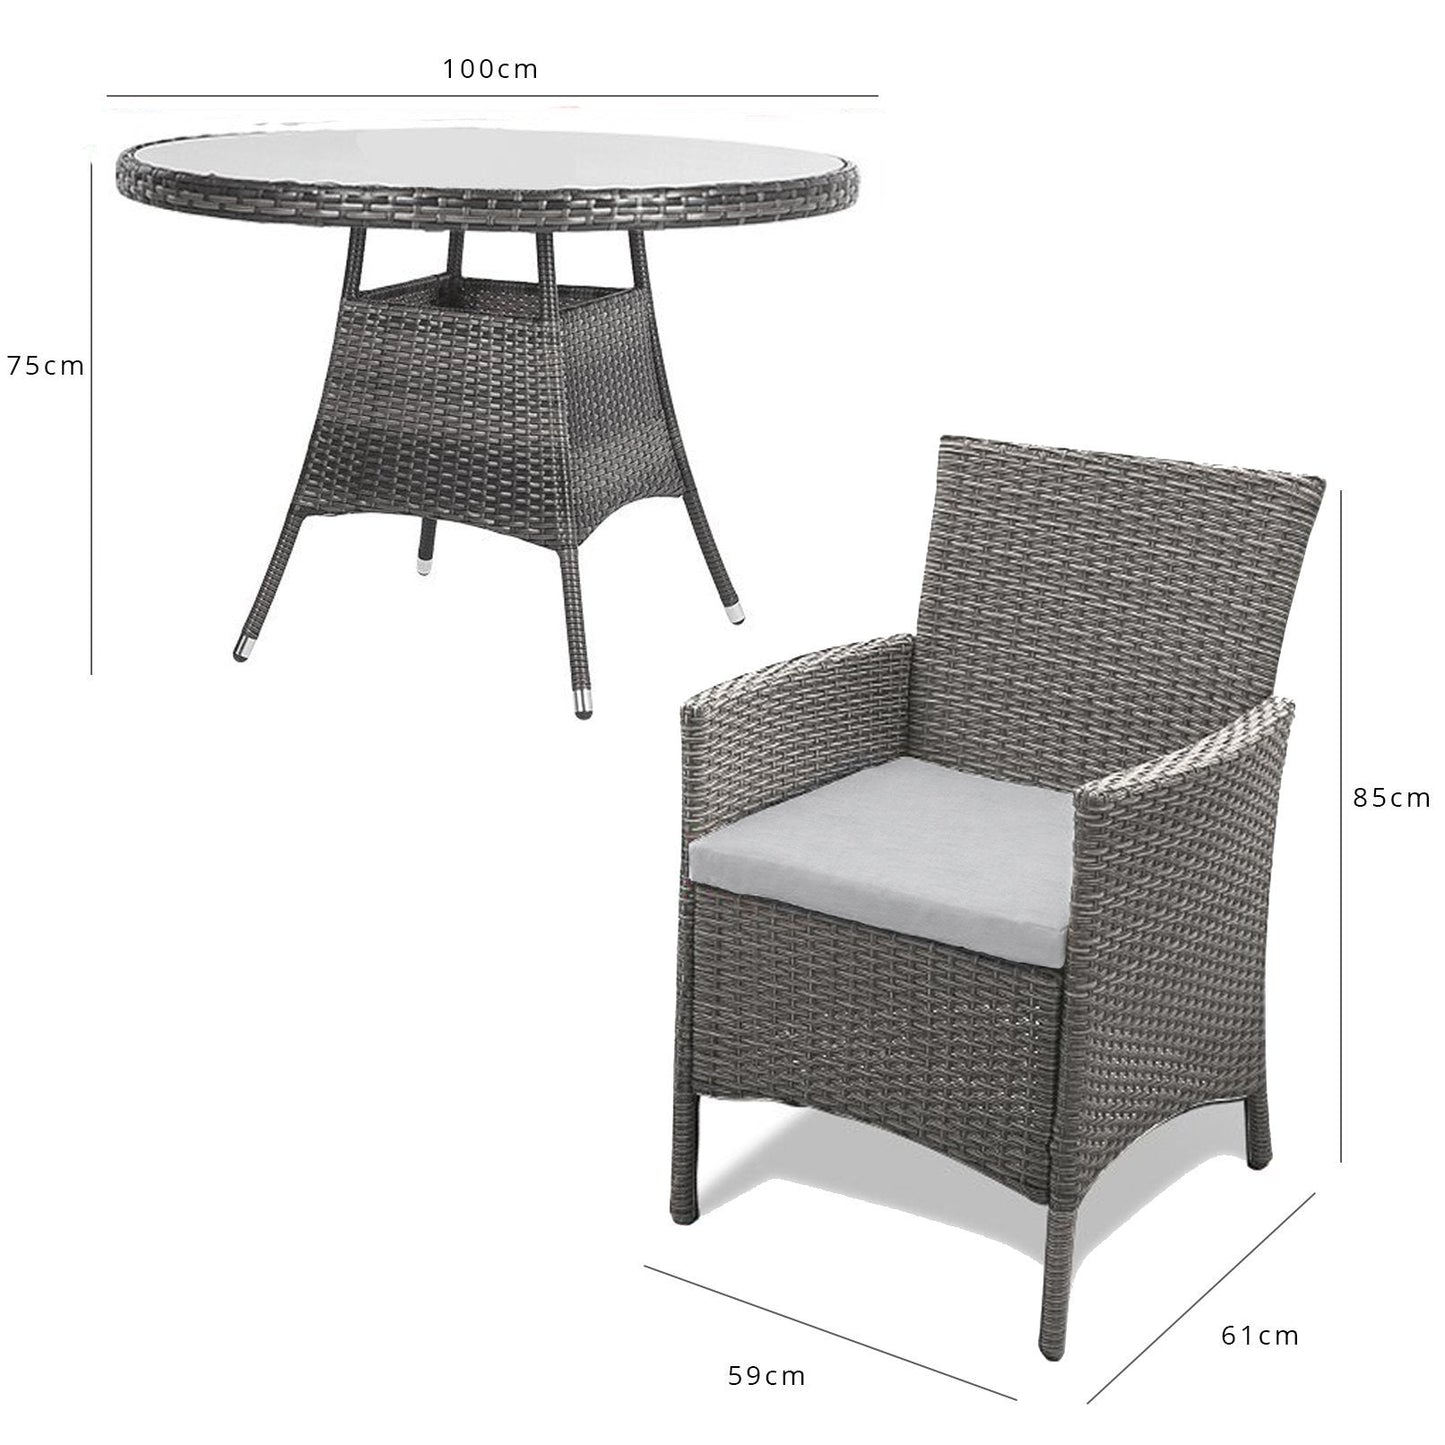 Kemble 4 Seater Rattan Round Dining Set with Parasol - Grey